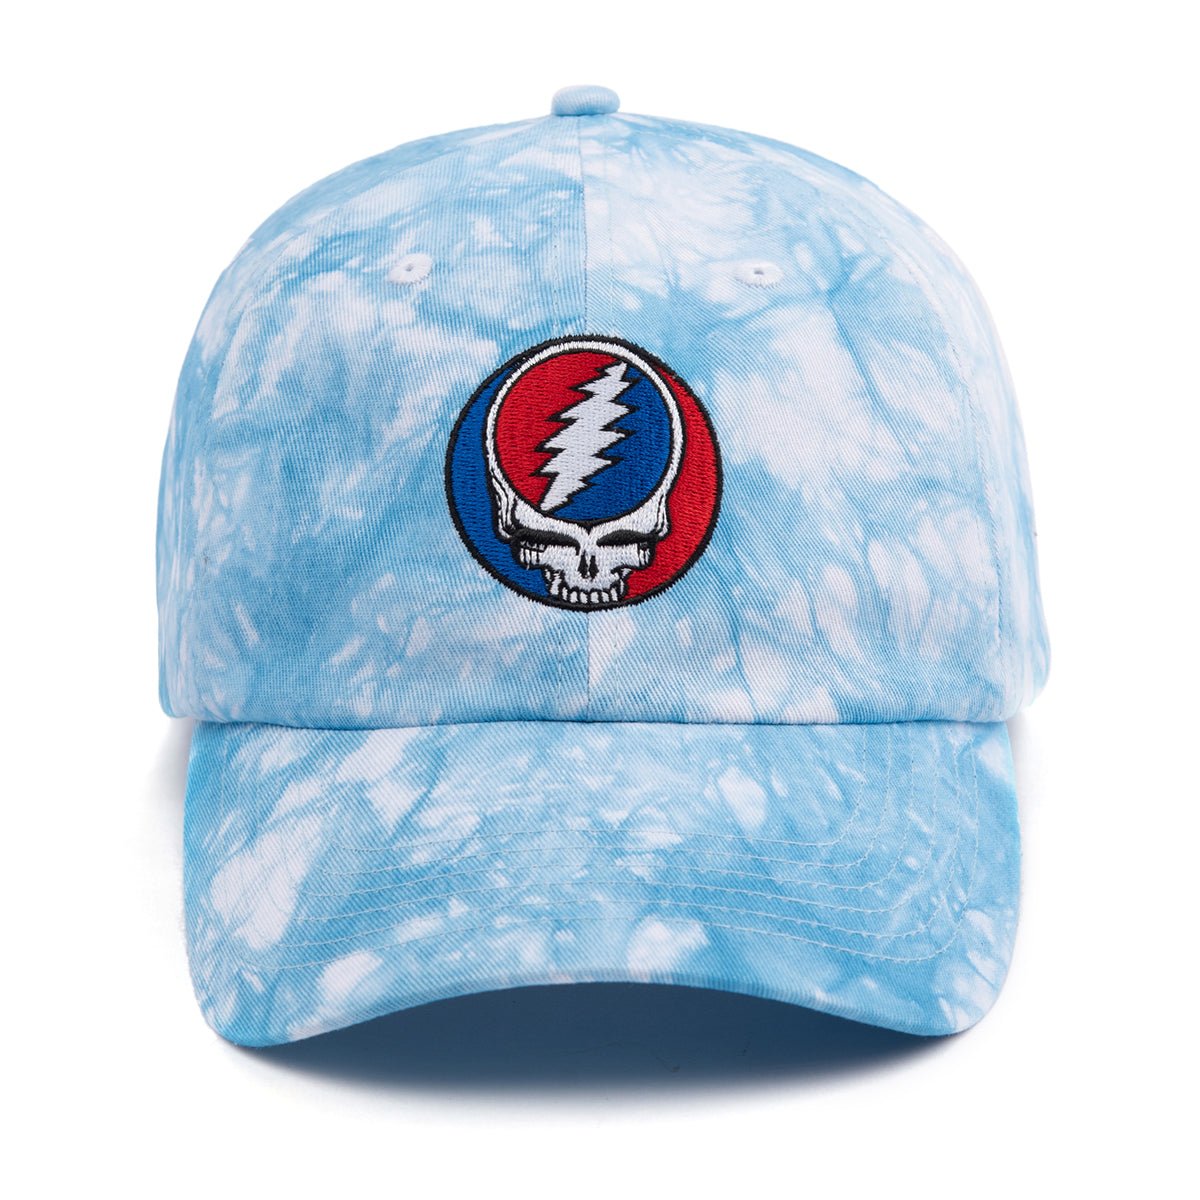 Grateful Dead x TGR Steal Your Face Dad Hat - Teton Gravity Research